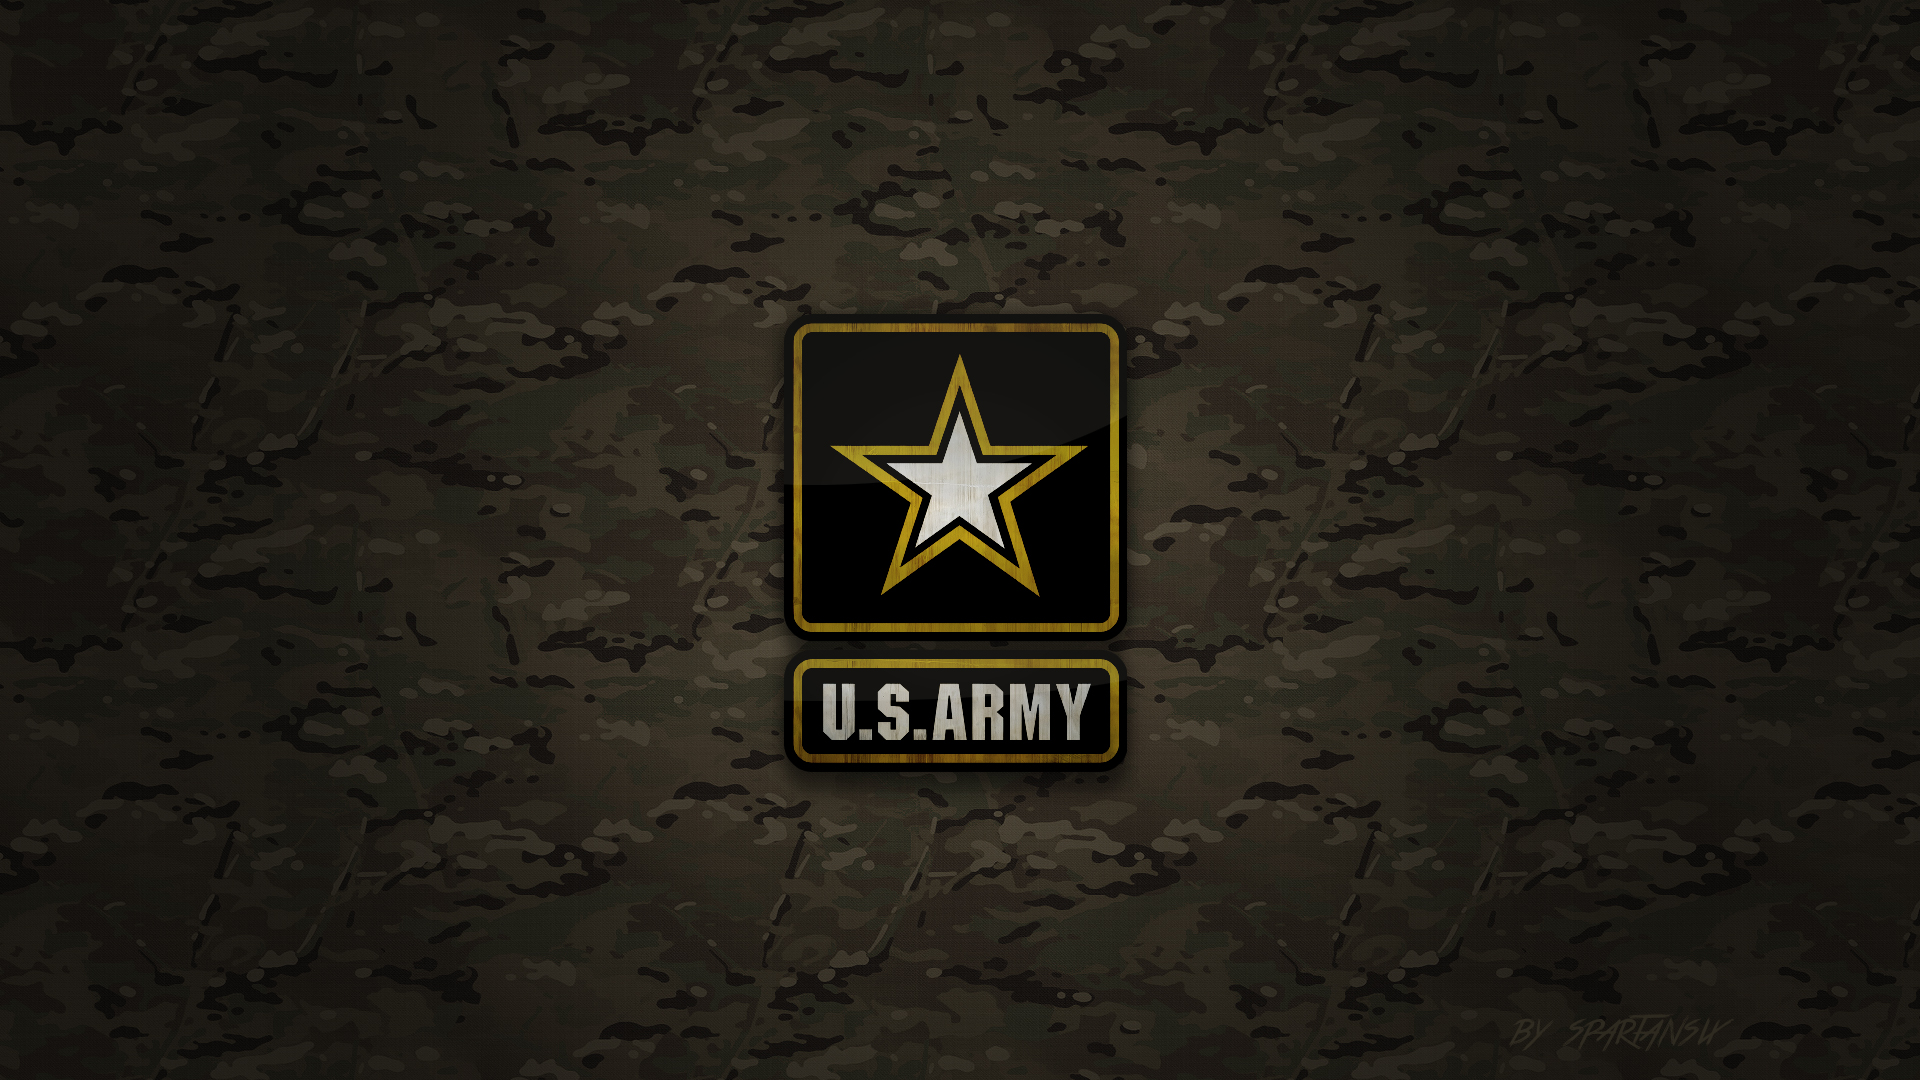 US Army Multicam Wallpaper by SpartanSix by SpartanSix on